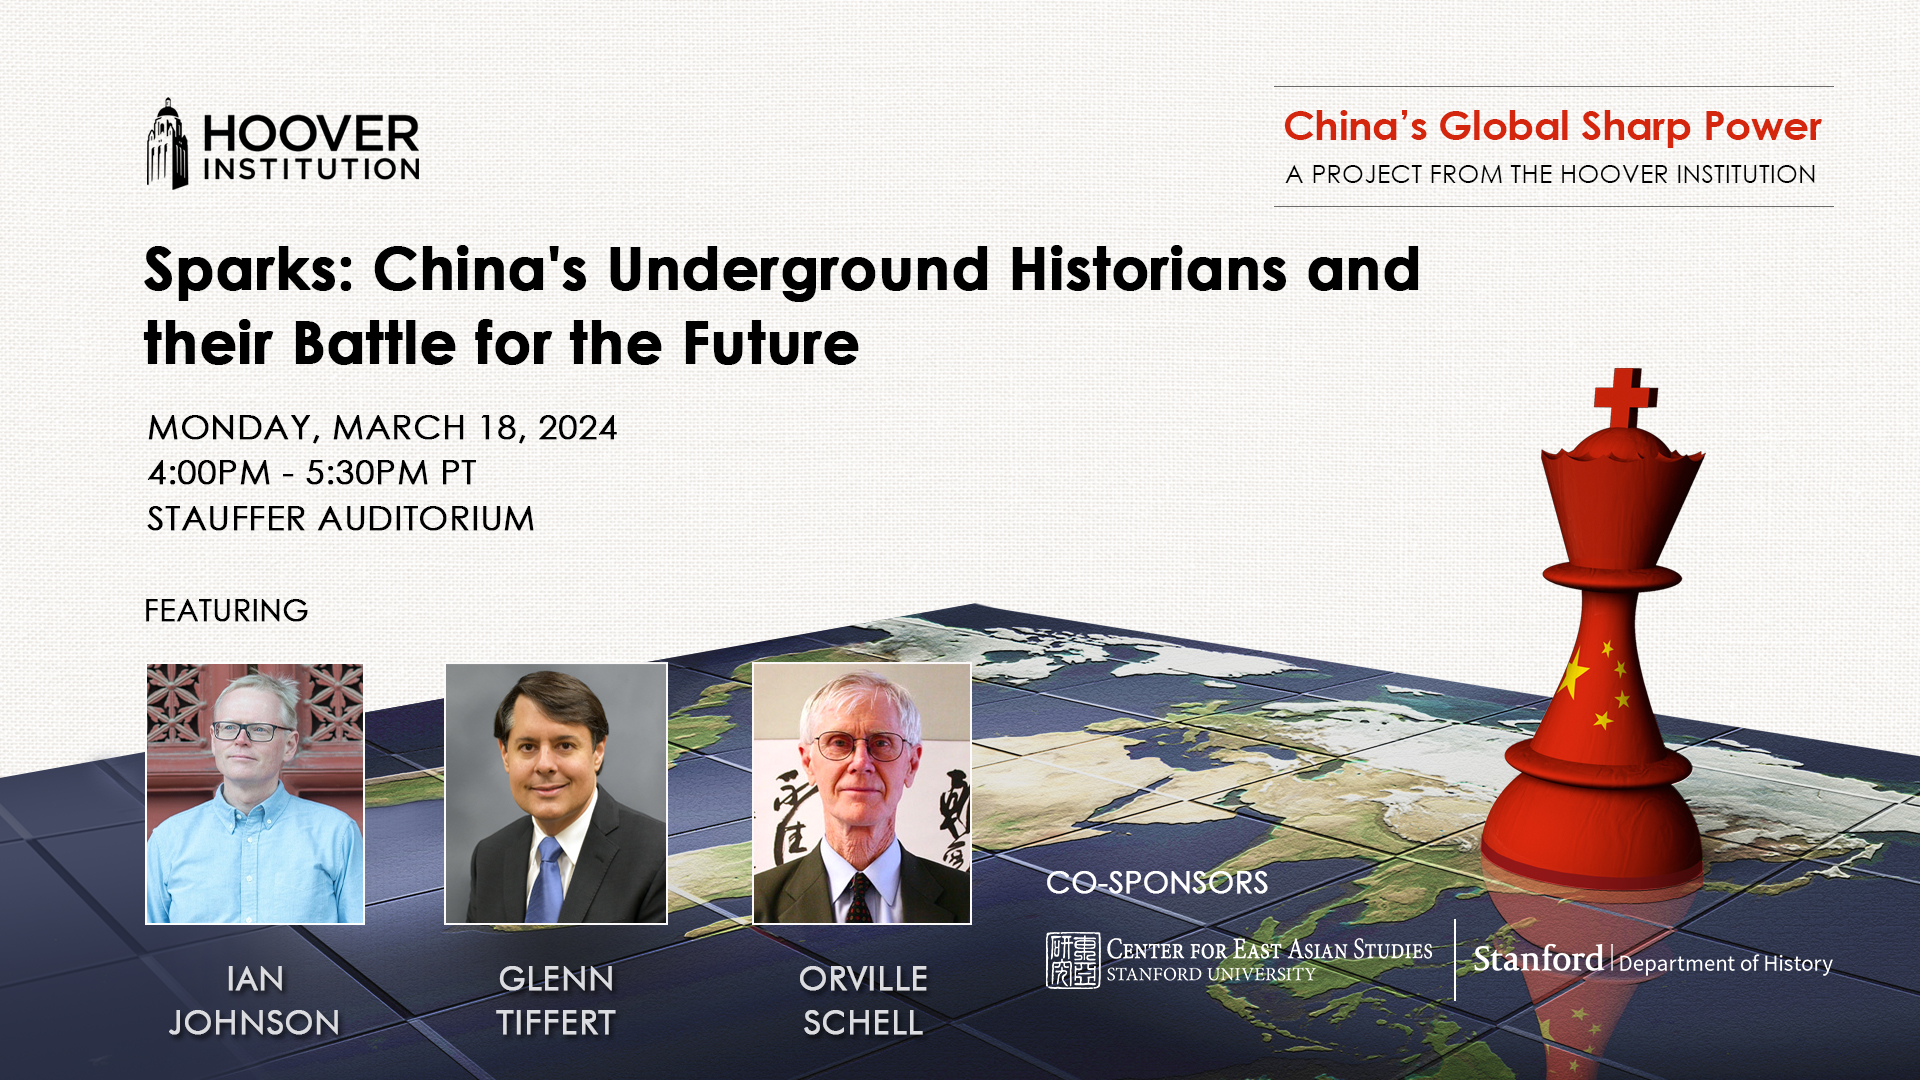 Sparks: China's Underground Historians and their Battle for the Future